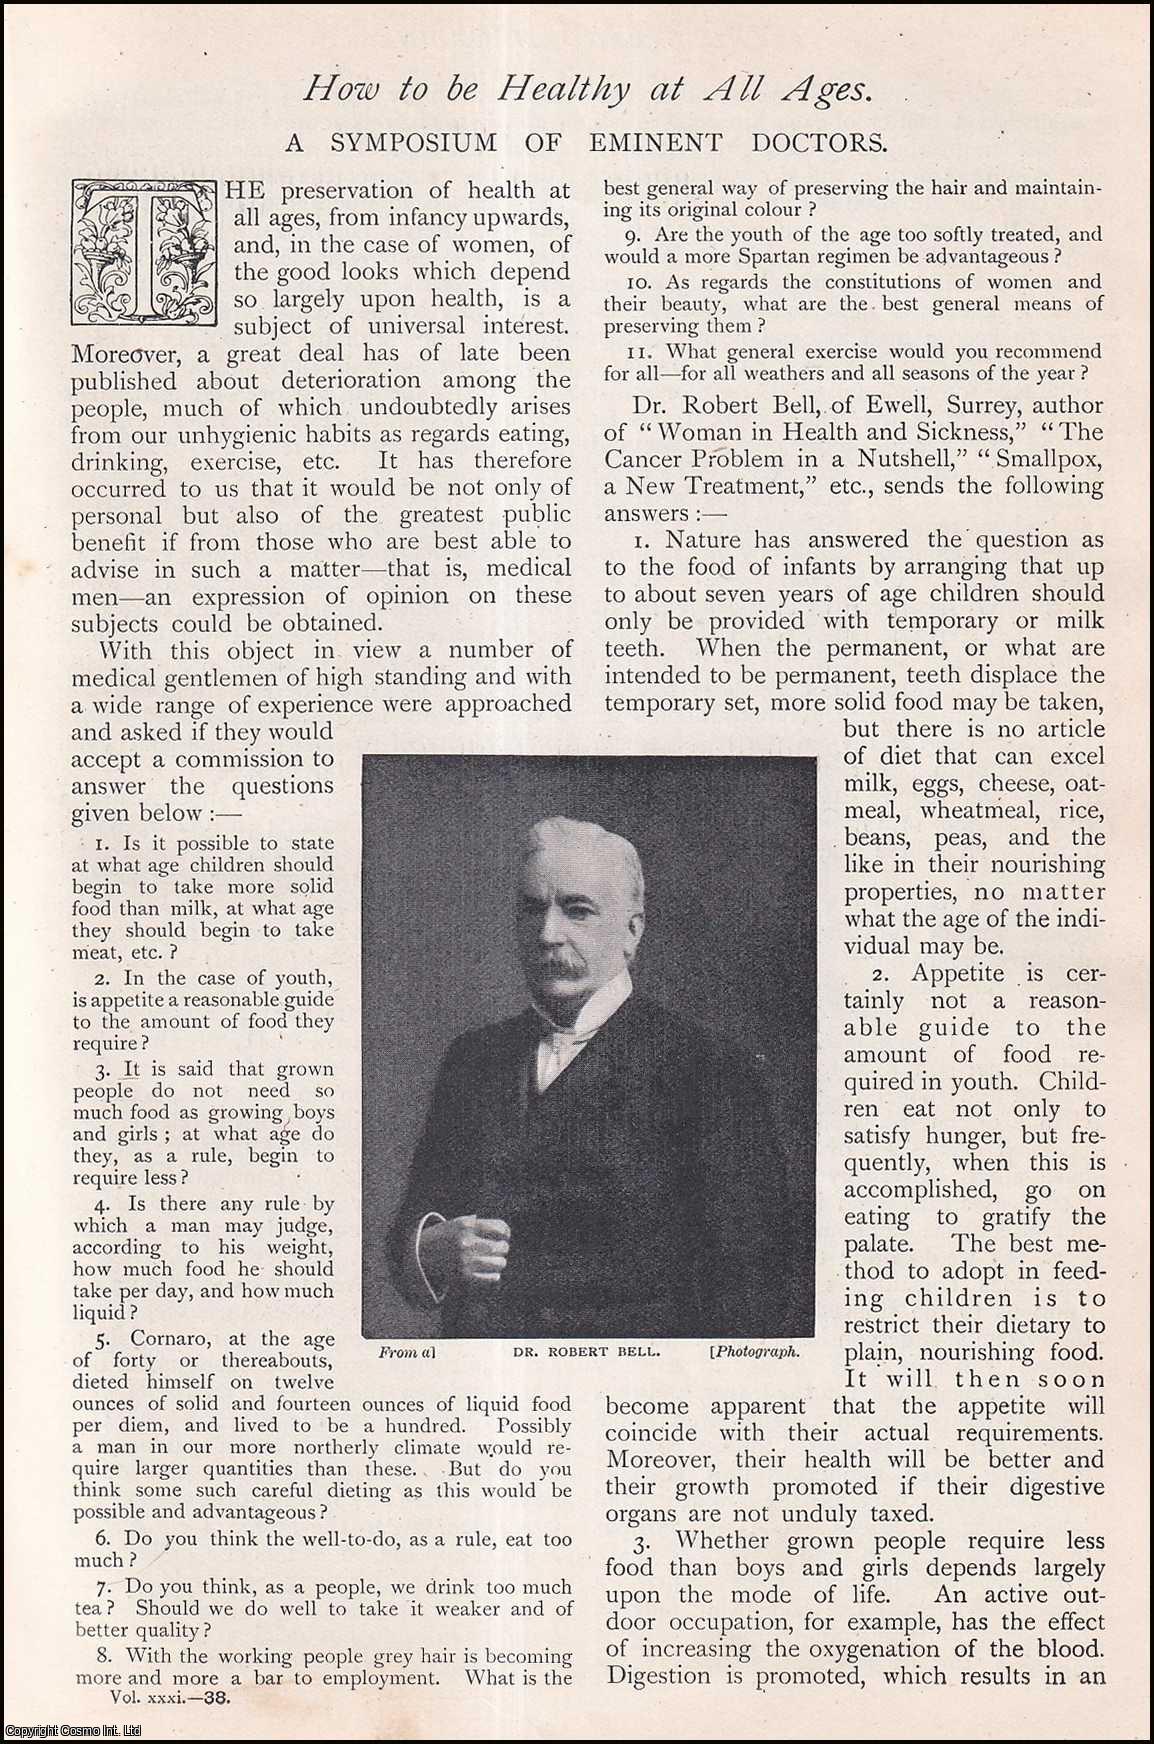 --- - How to be Healthy at all Ages. A Symposium of Eminent Doctors. A rare original article from The Strand Magazine, 1906.